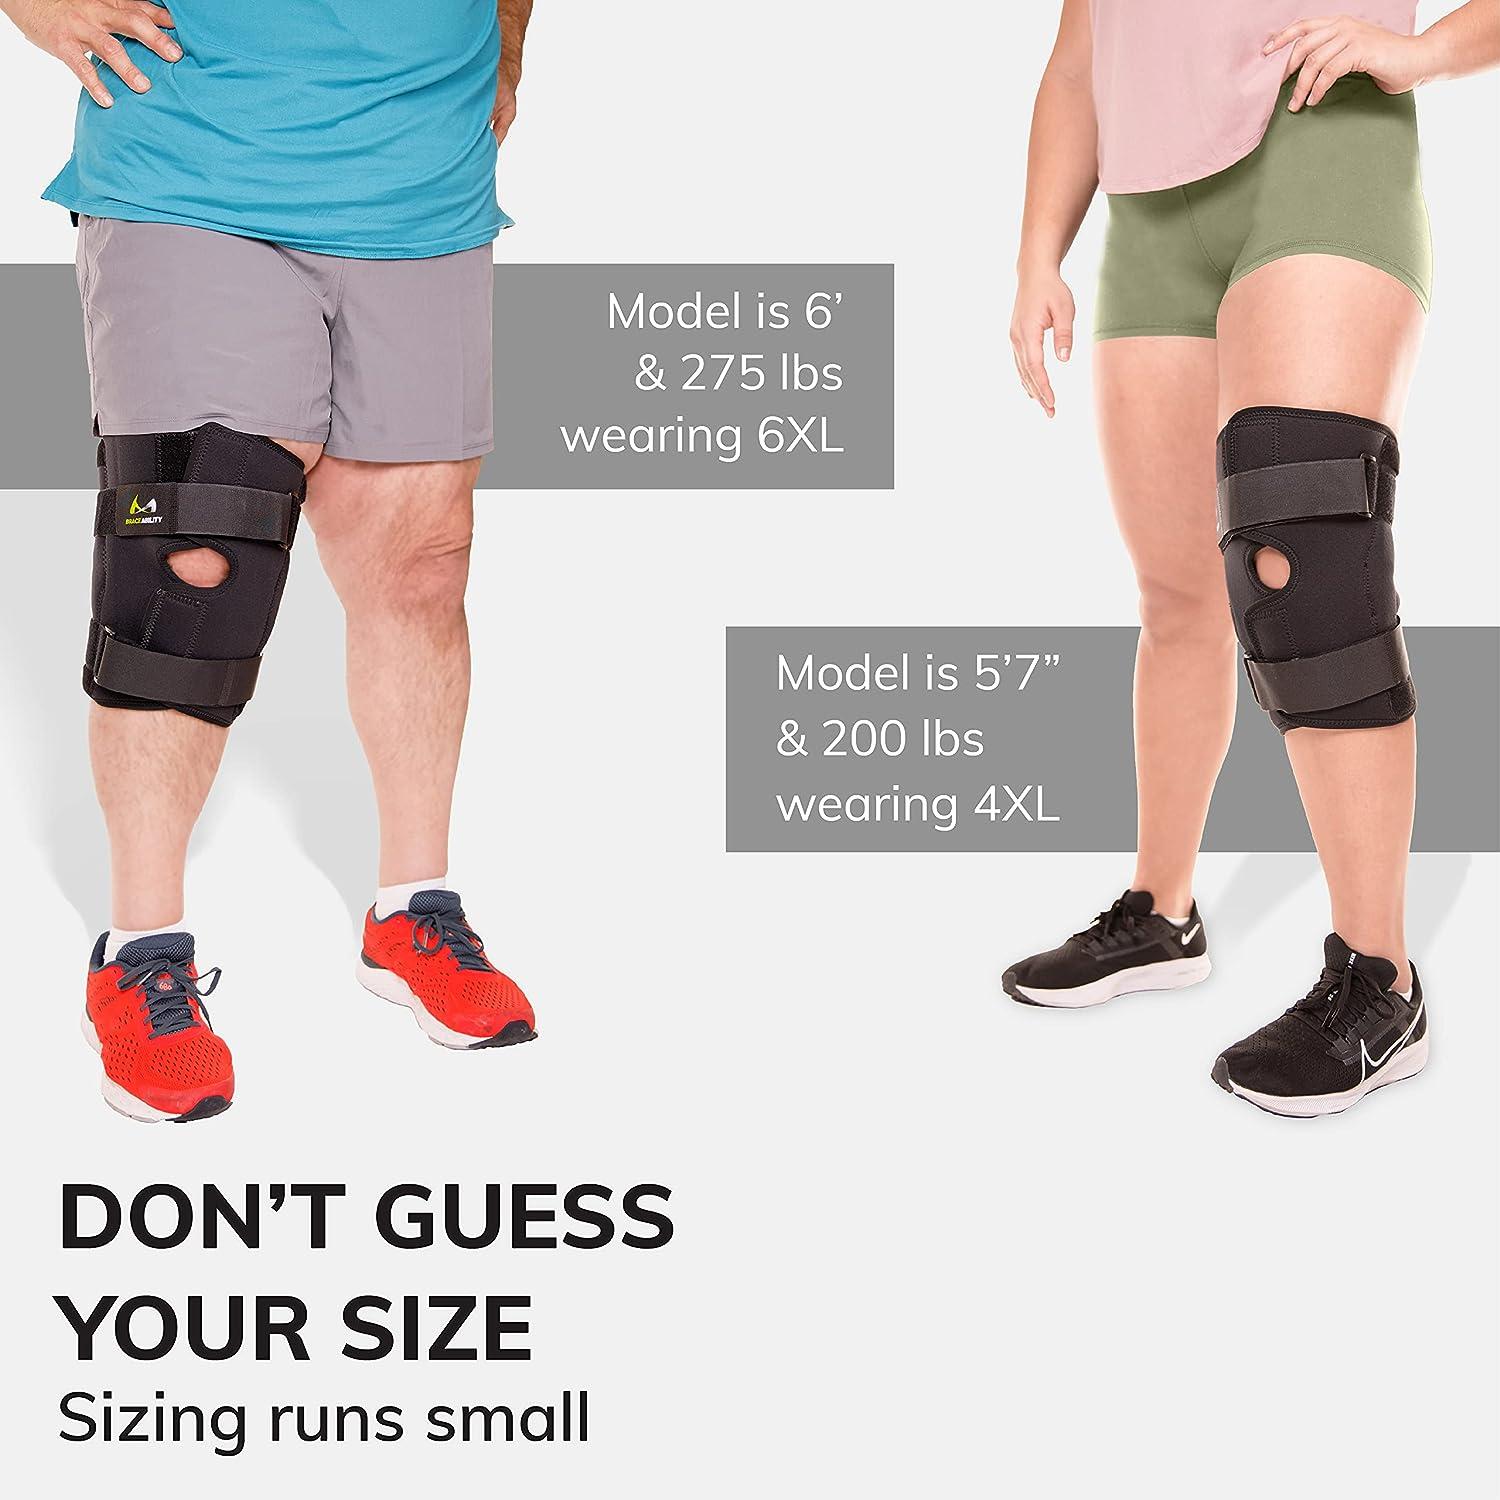  BraceAbility Plus Size Neoprene Knee Sleeve - Bariatric Knee  Compression Sleeve For Large Legs And Big Thighs, Arthritis Joint Pain Support  Knee Brace For Obese - Fits Men And Women